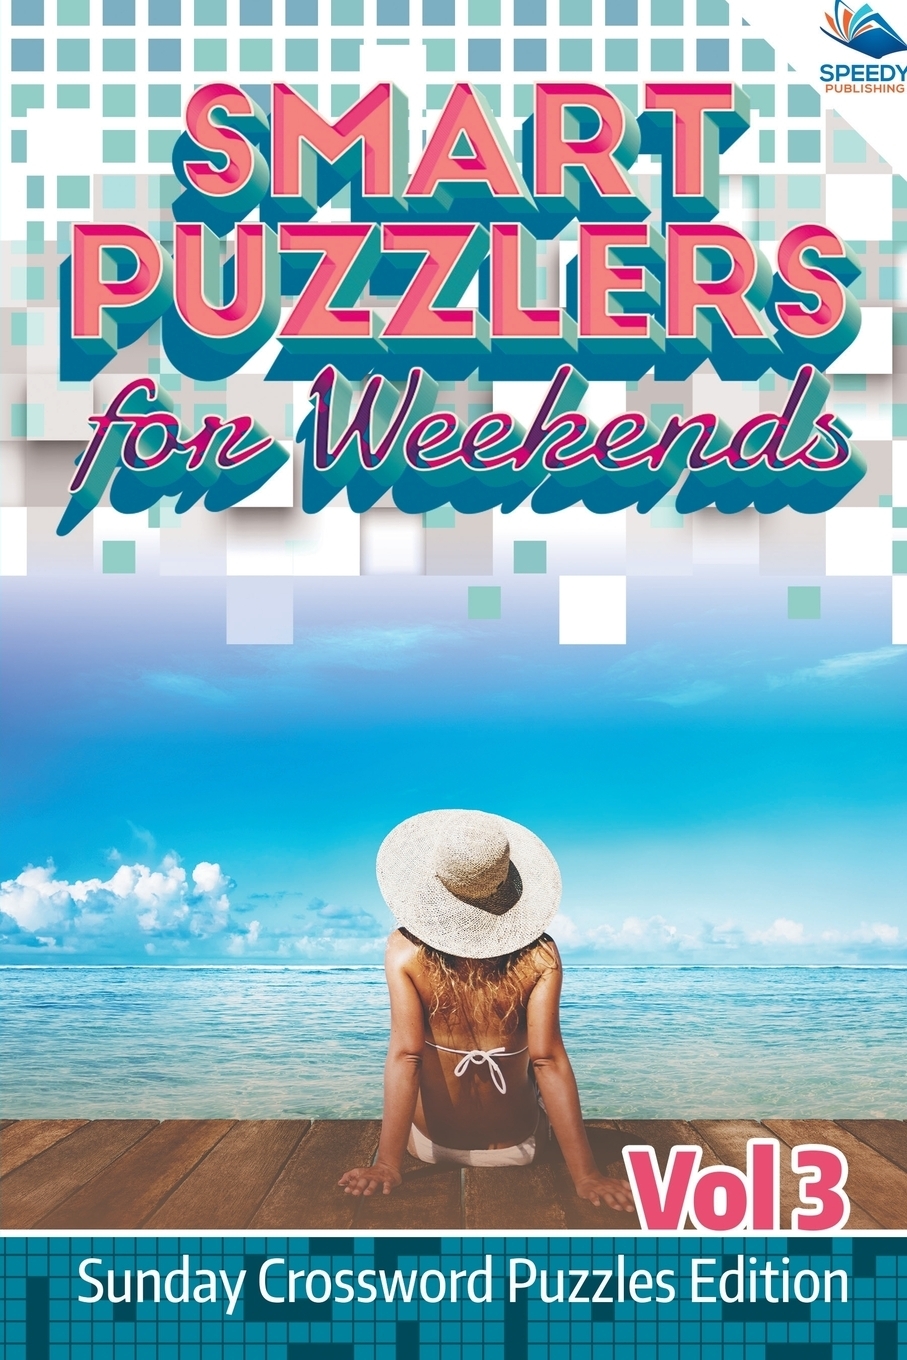 фото Smart Puzzlers for Weekends Vol 3. Sunday Crossword Puzzles Edition